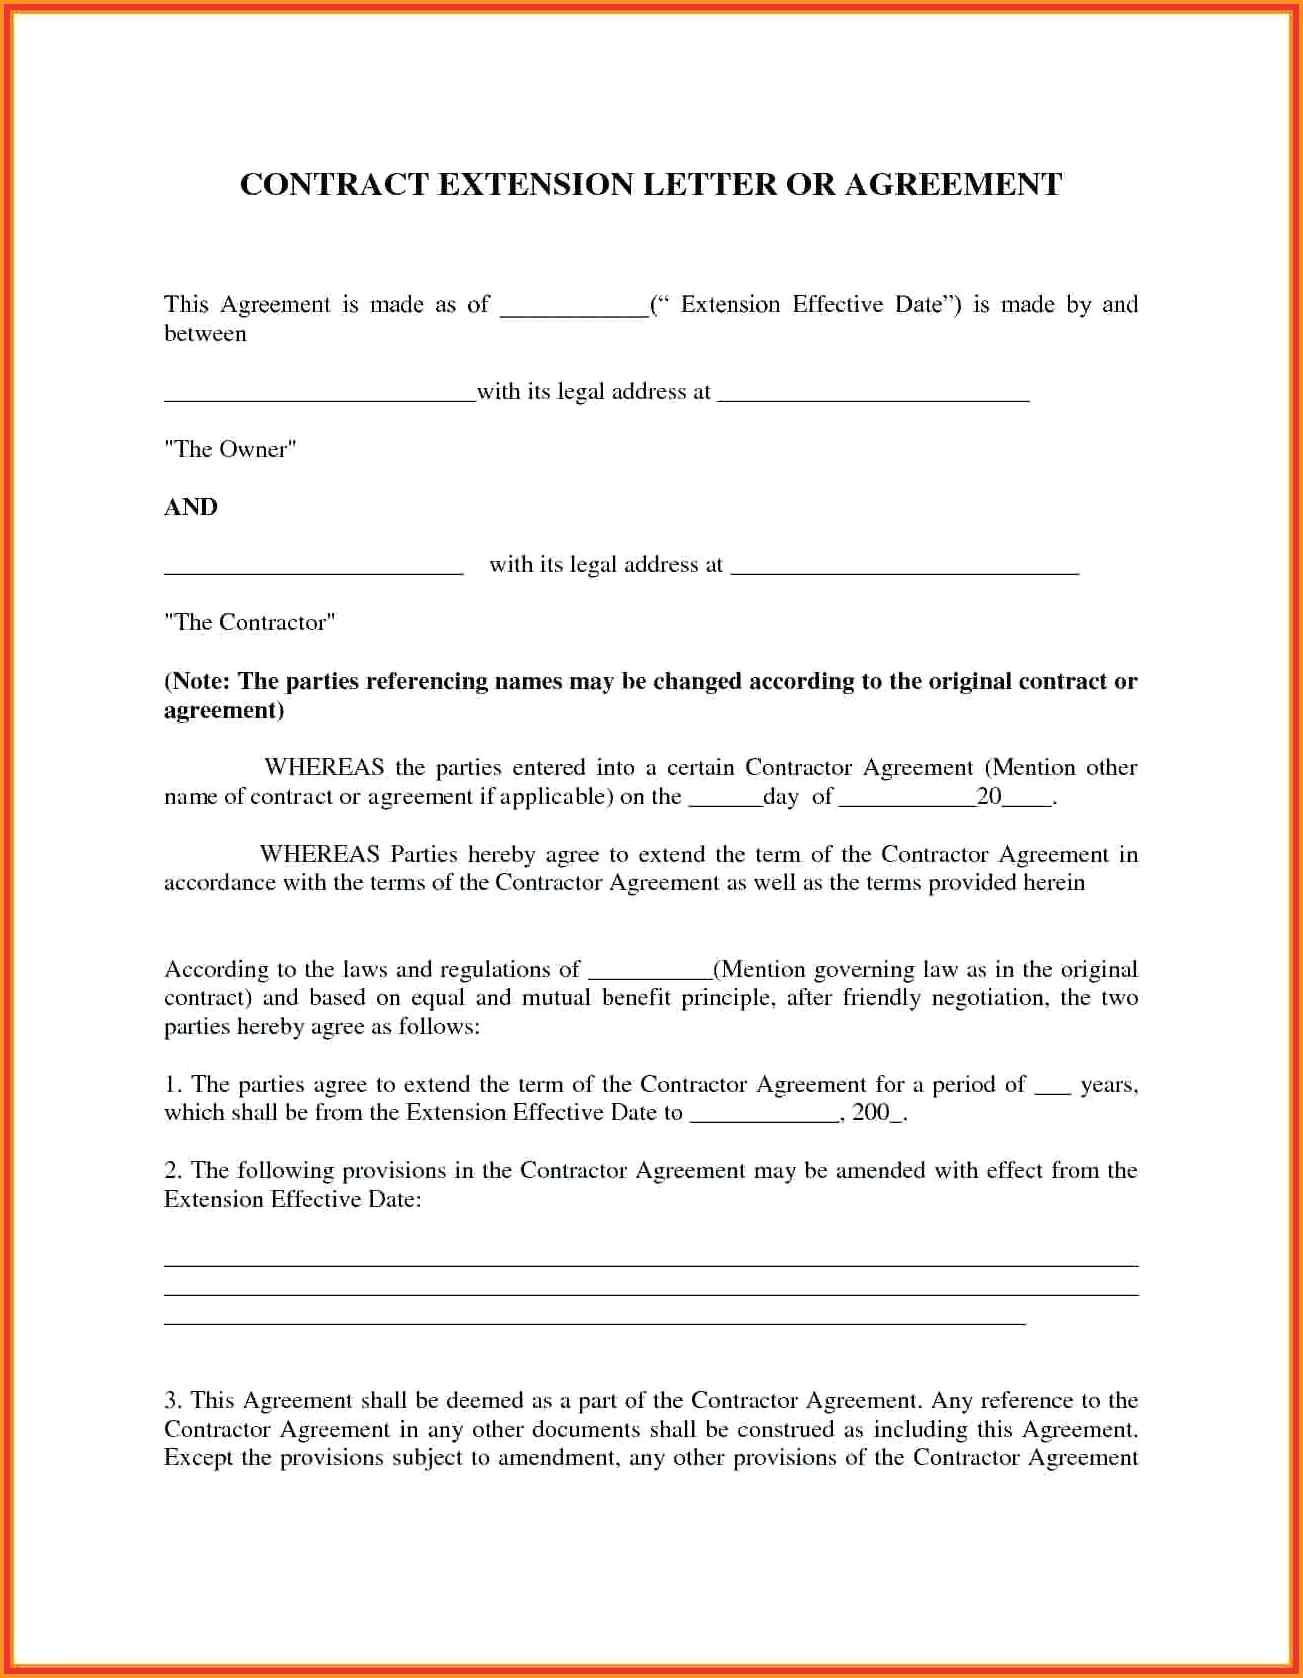 Writing service agreements